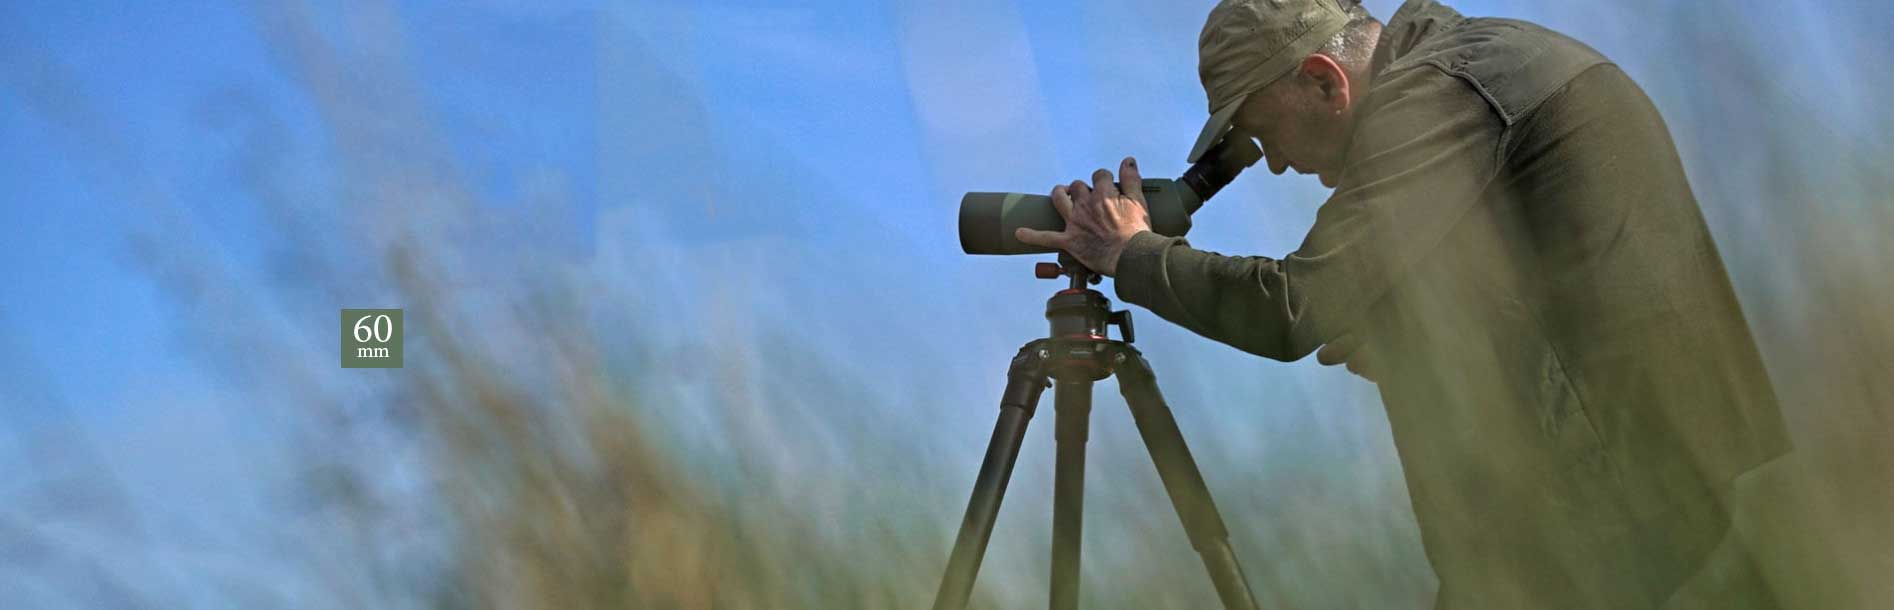 Old Male Looking Through the Kowa TSN-601 Spotting Scope in the Wild